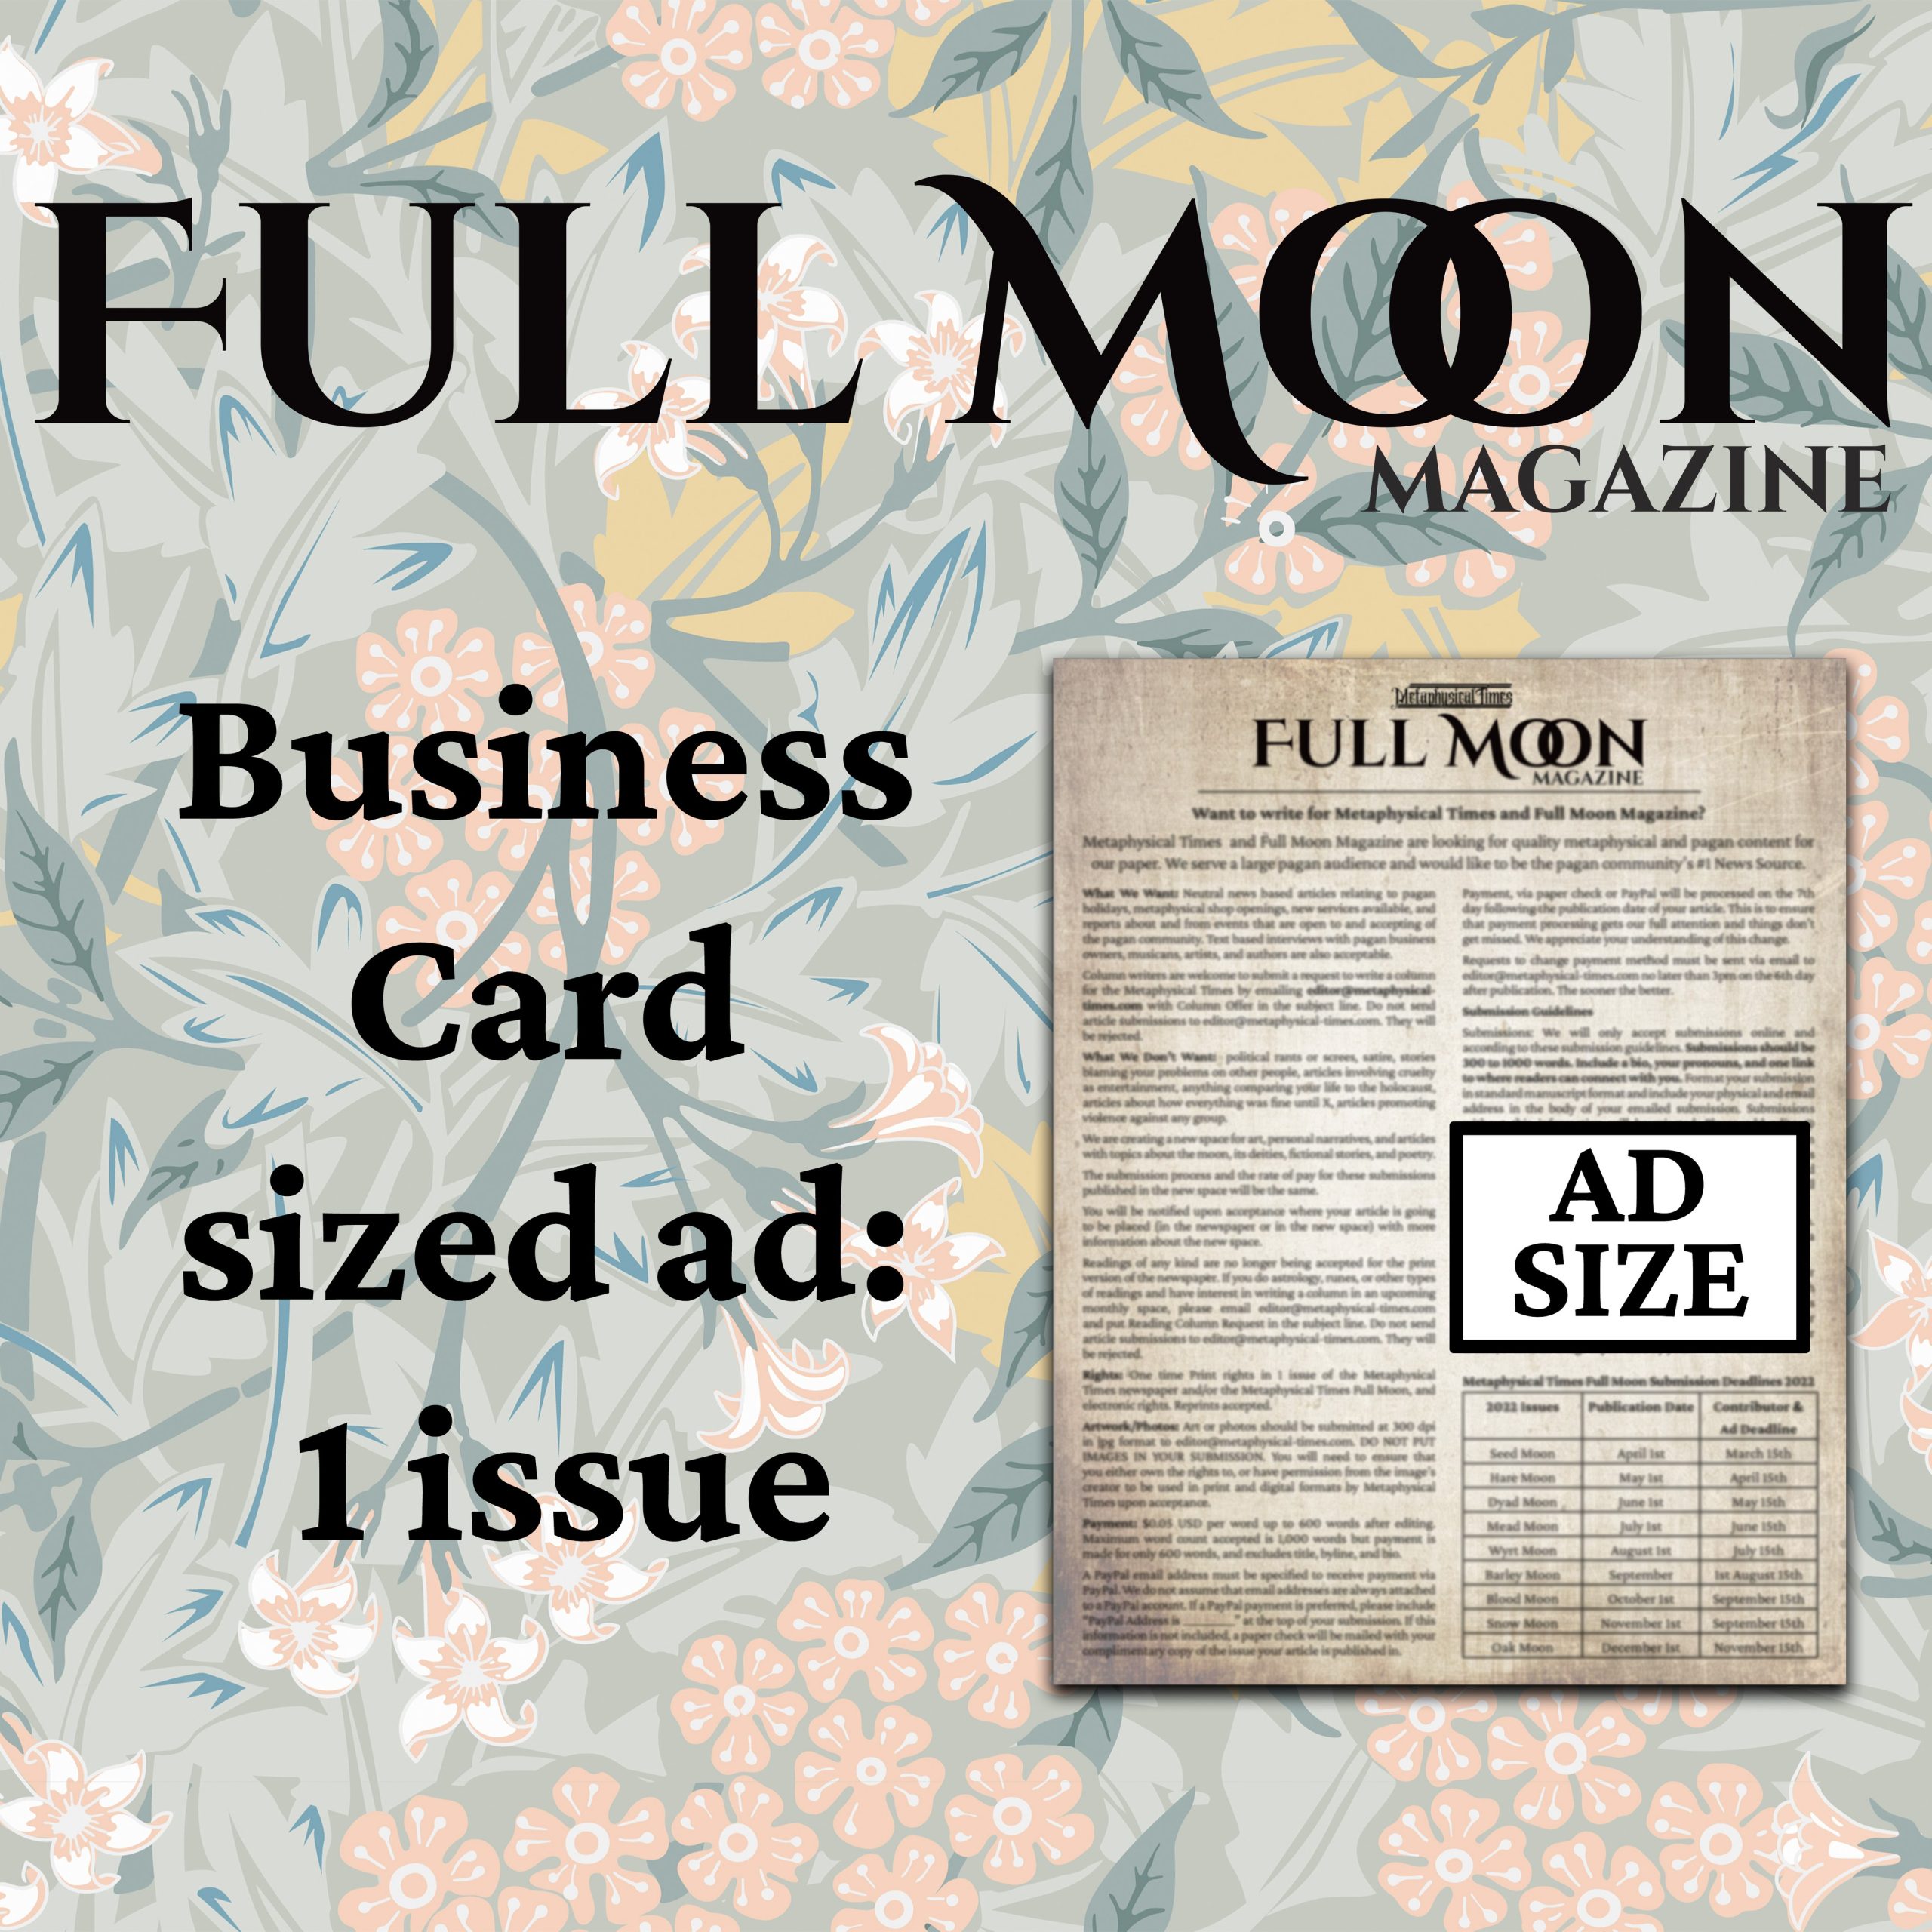 FM Single Issue Business Card Size Ad 